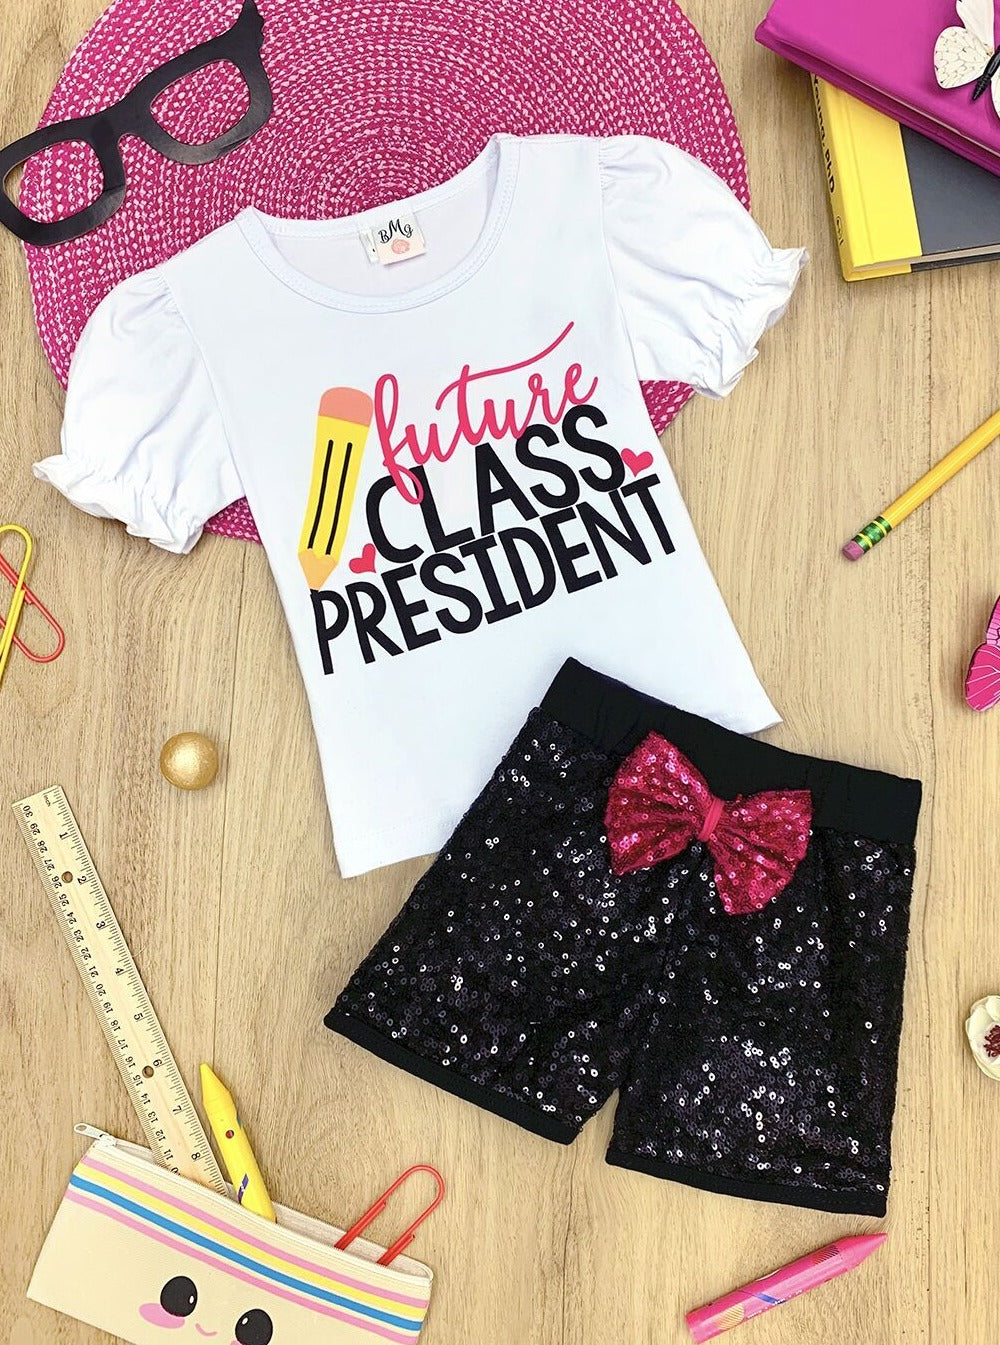 Little girls back to school "Future Class President" graphic top with puffed short sleeves and sequin mesh shorts with bow - Mia Belle Girls